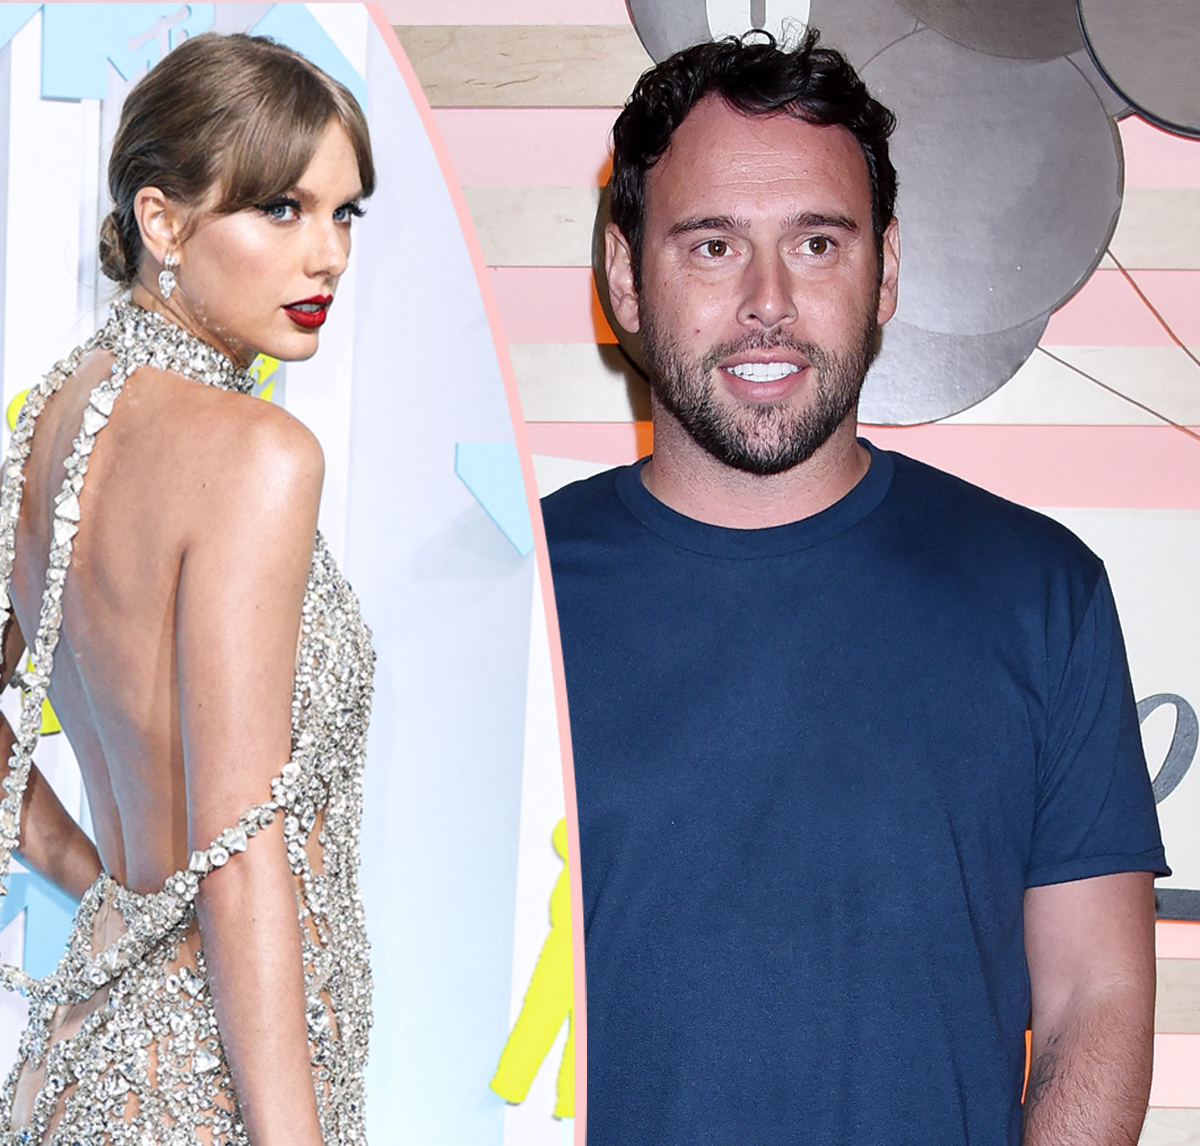 Scooter Braun Admits ‘Regret’ Over How He Handled Buying Taylor Swift’s Music Catalog